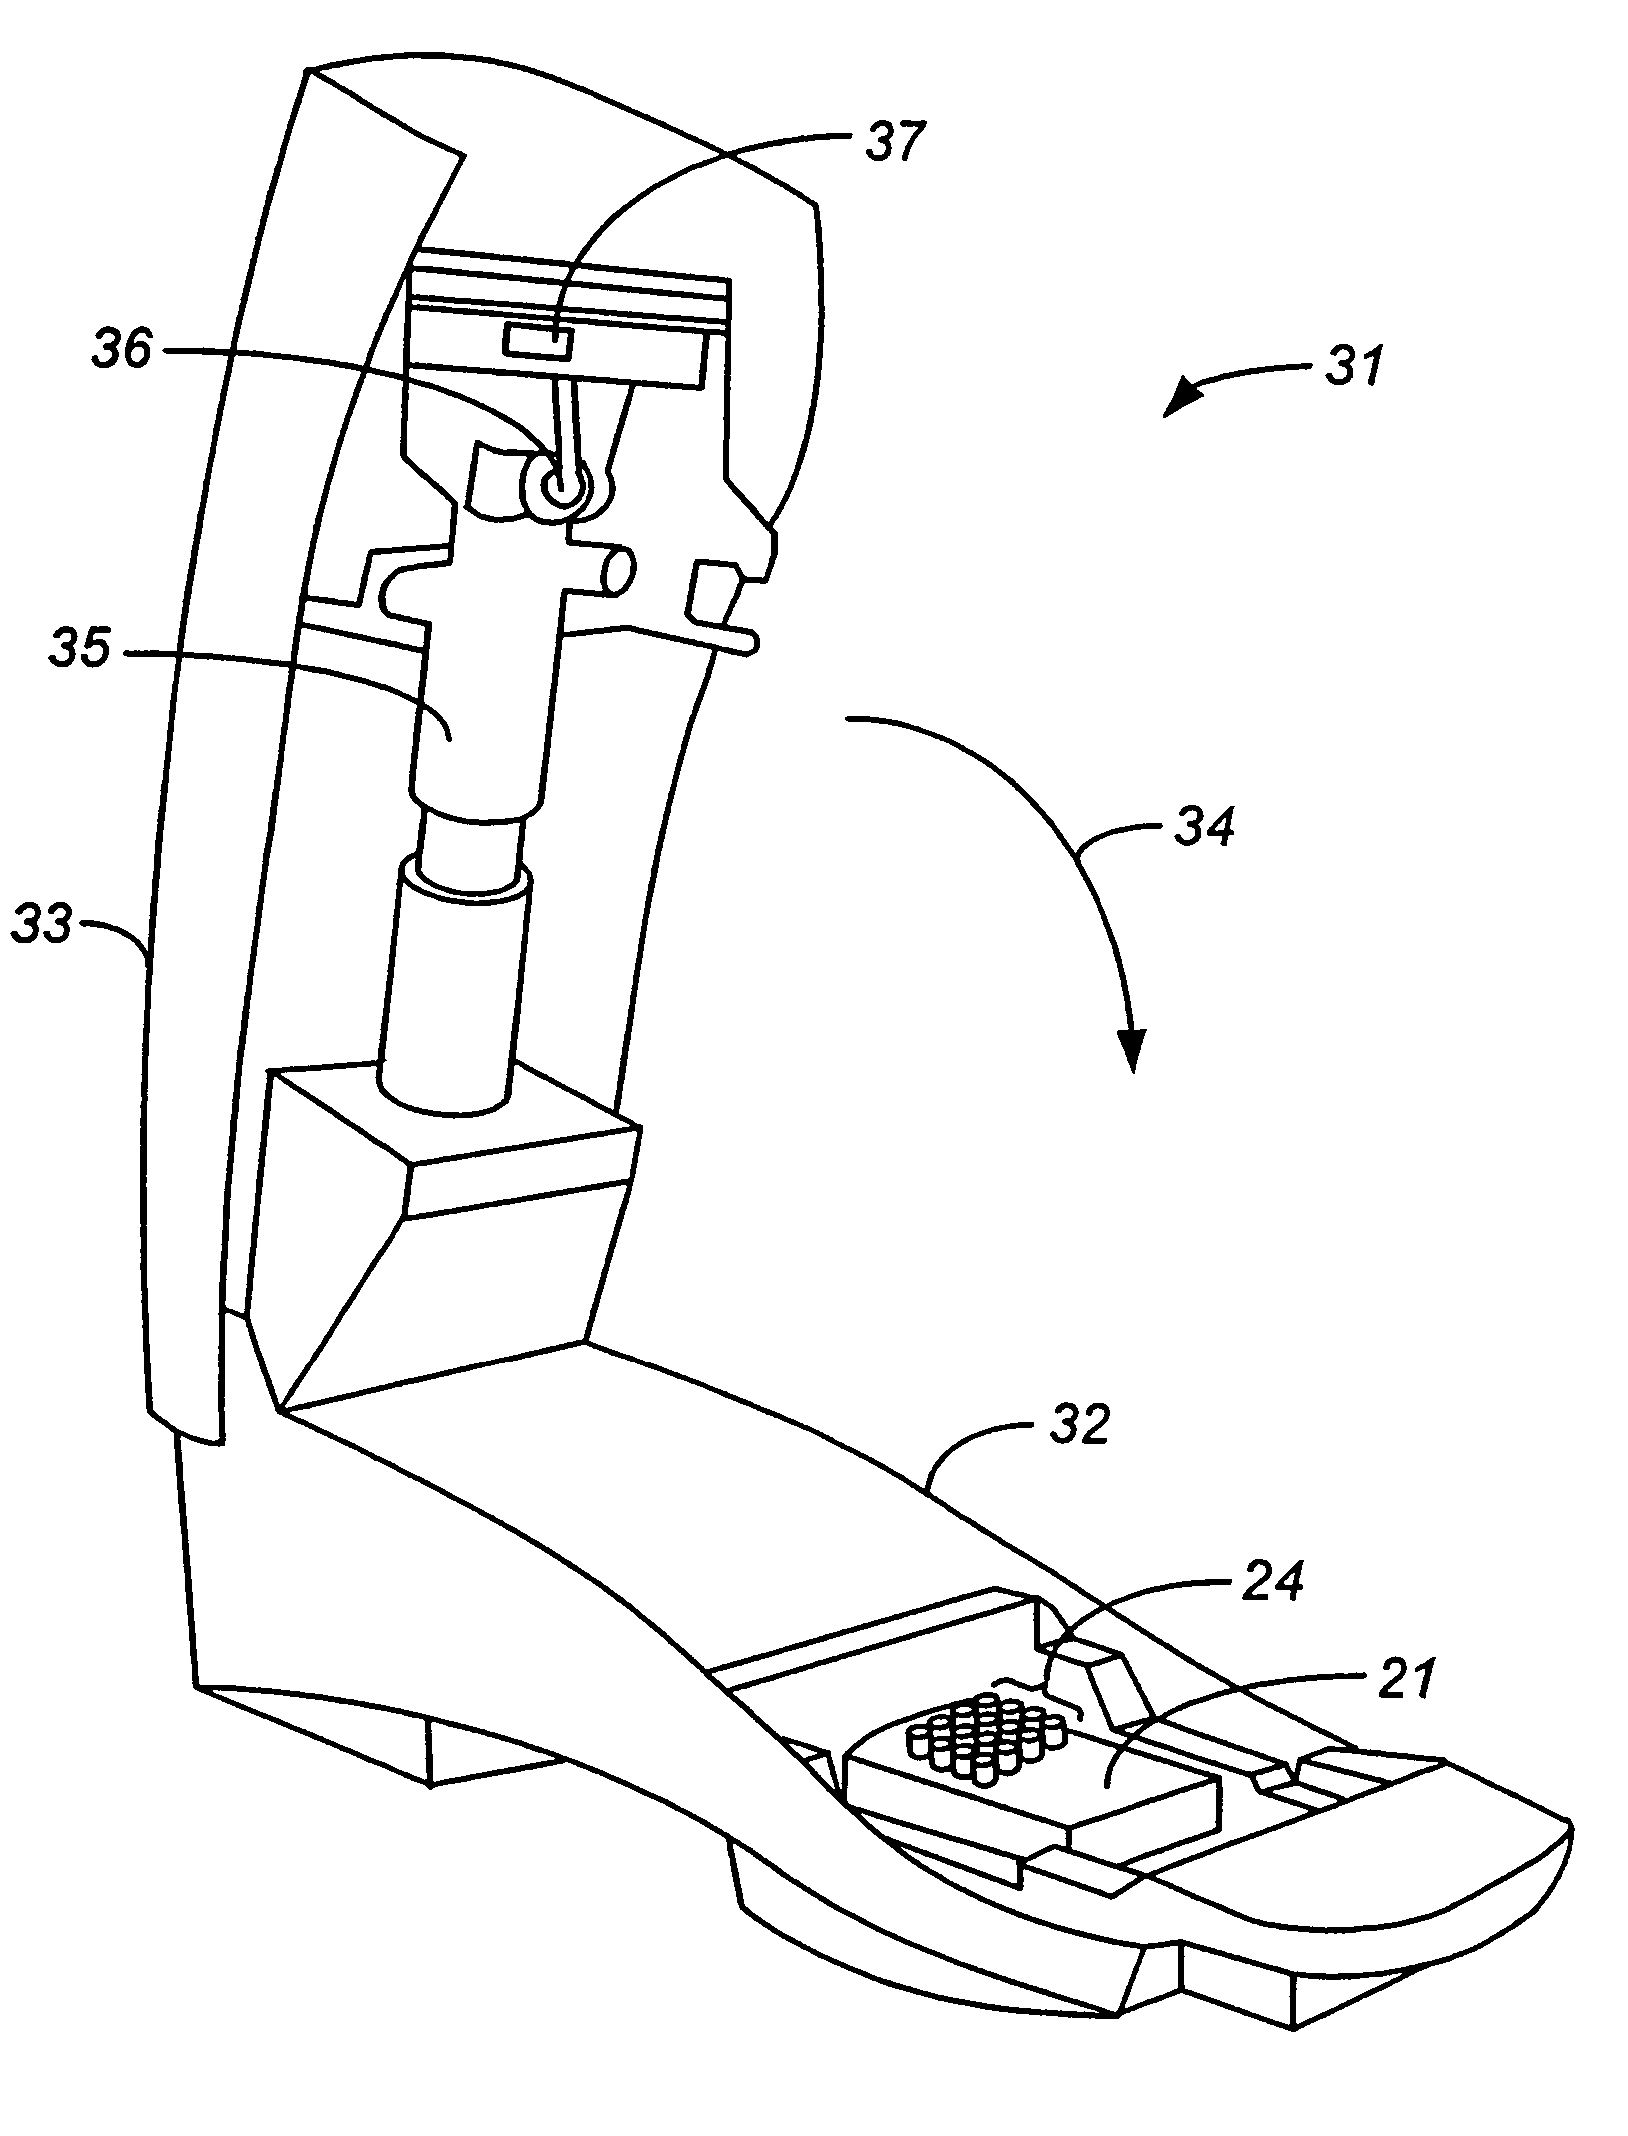 Apparatus for priming microfluidics devices with feedback control